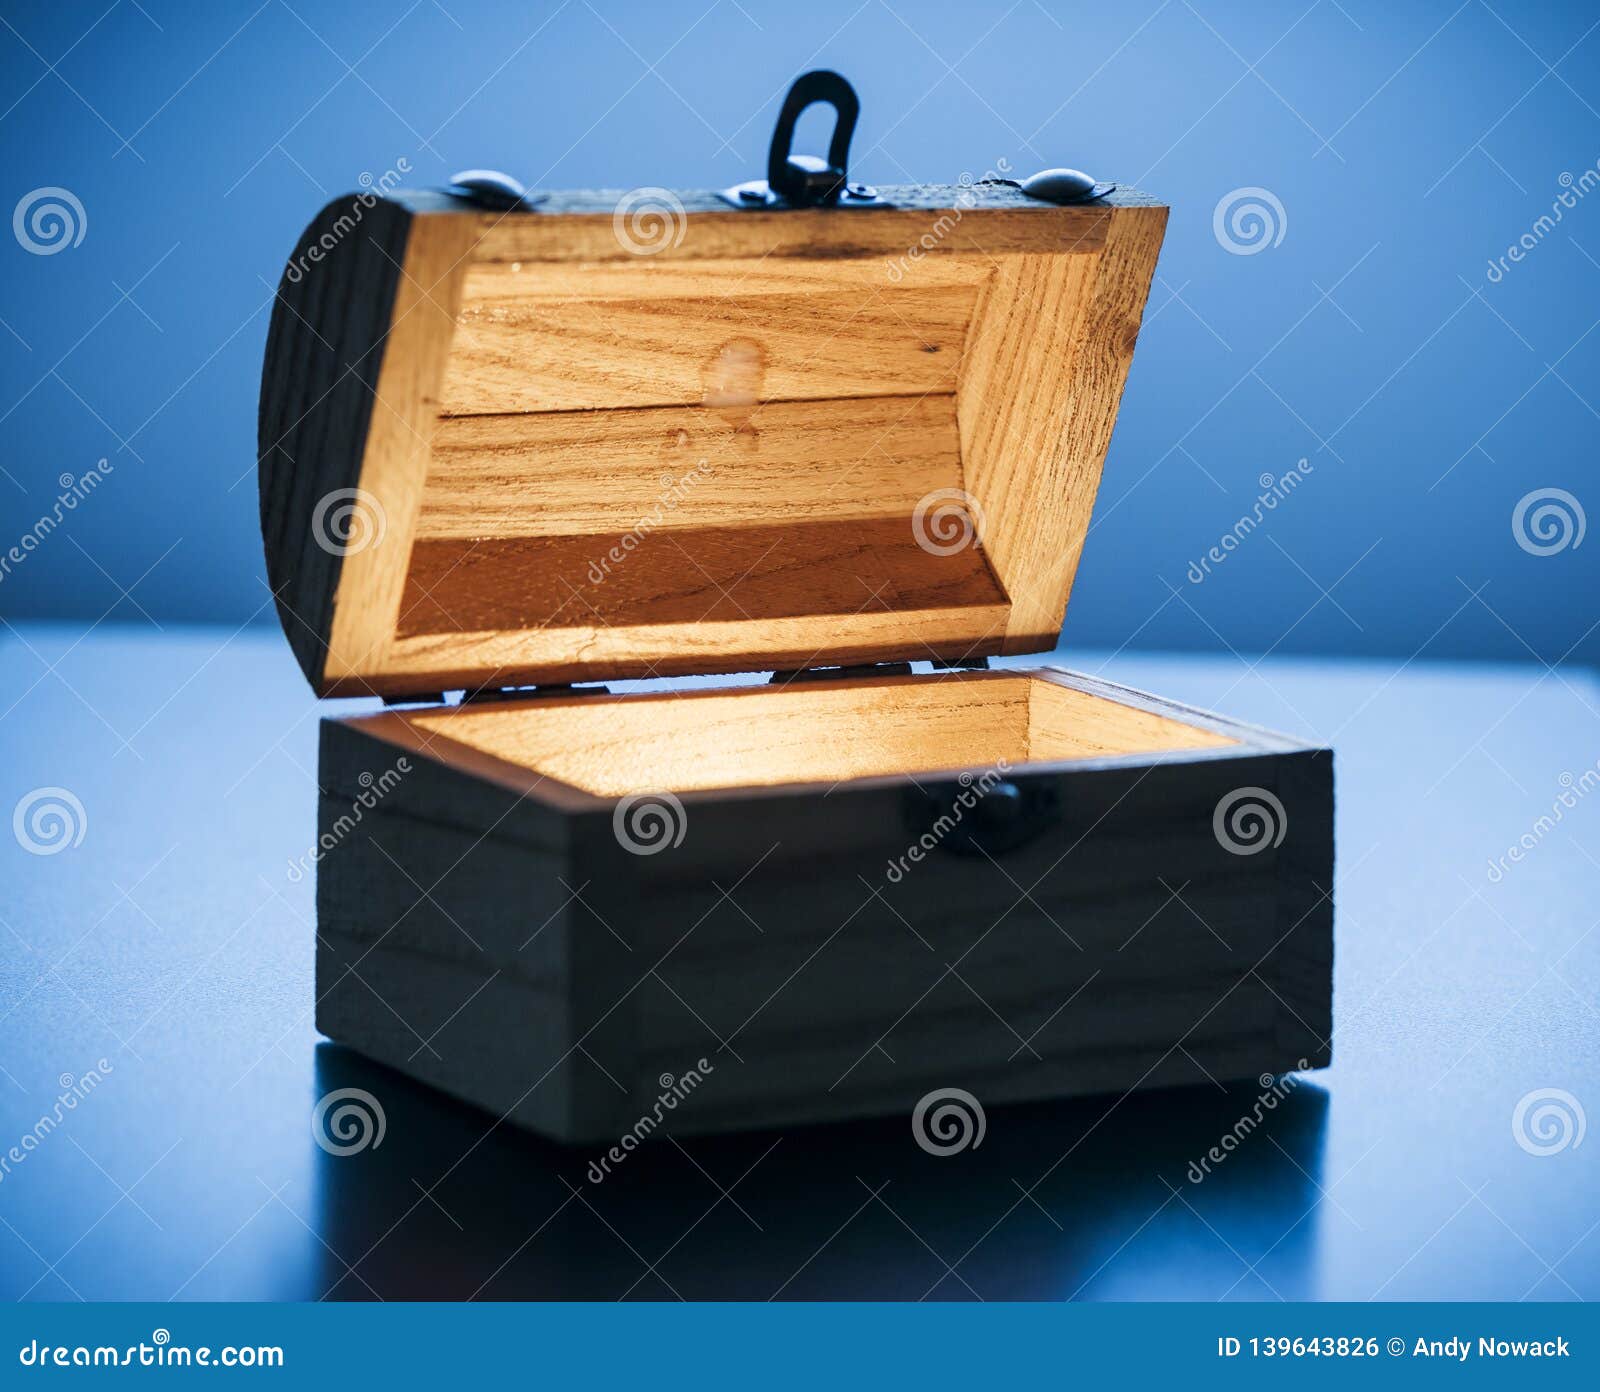 Small Treasure Chest Shady on Blue Stock Photo - Image of blue